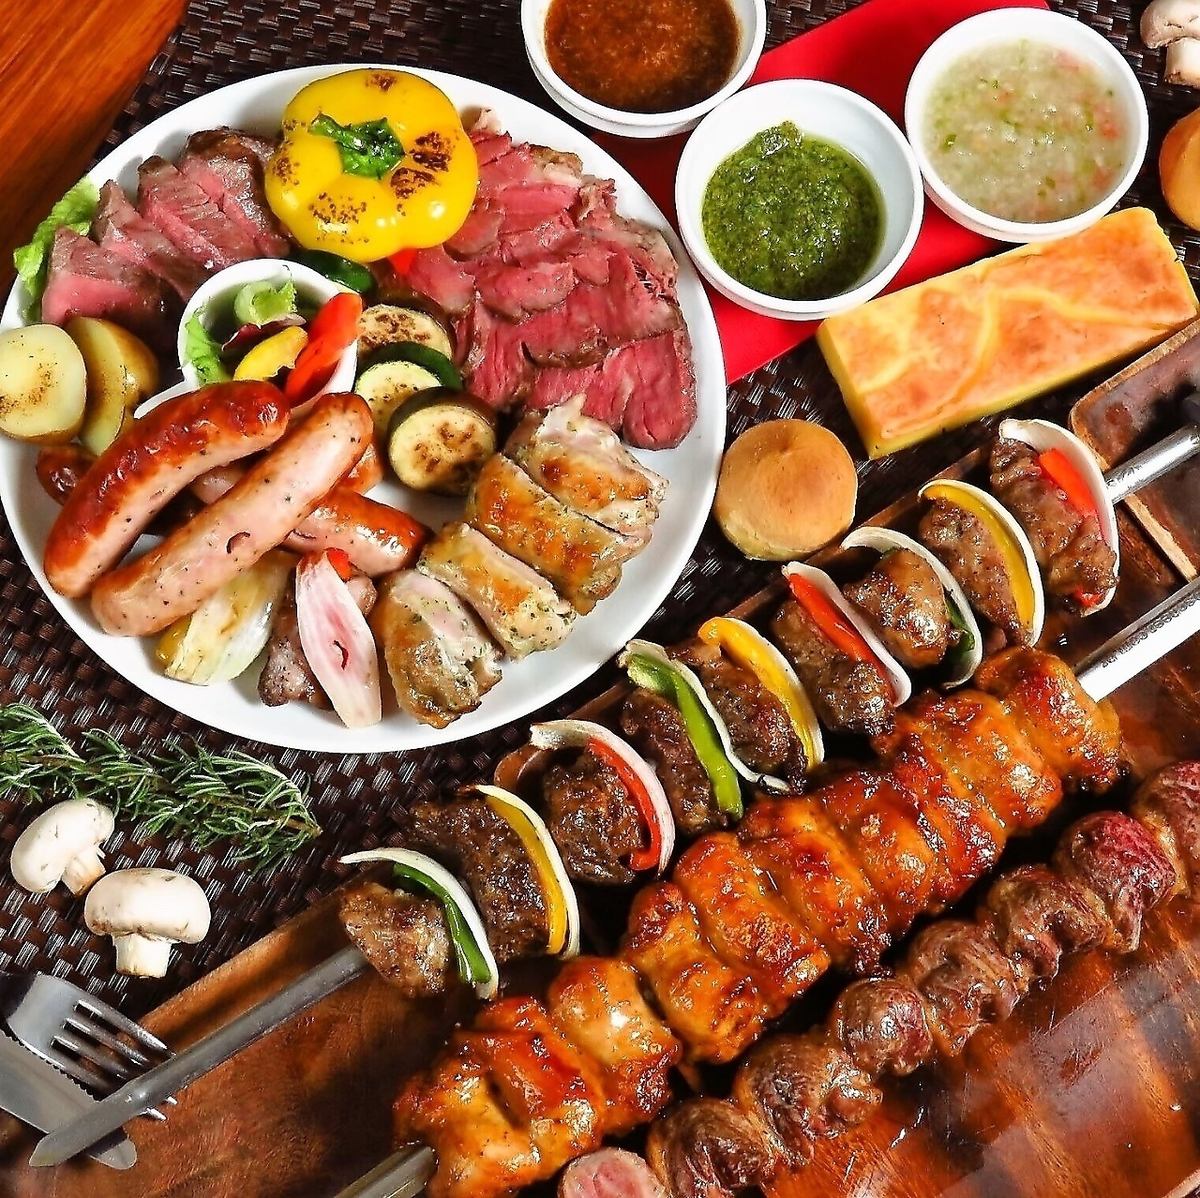 Churrasco party at ALEGRIA! Enjoy all-you-can-eat meal